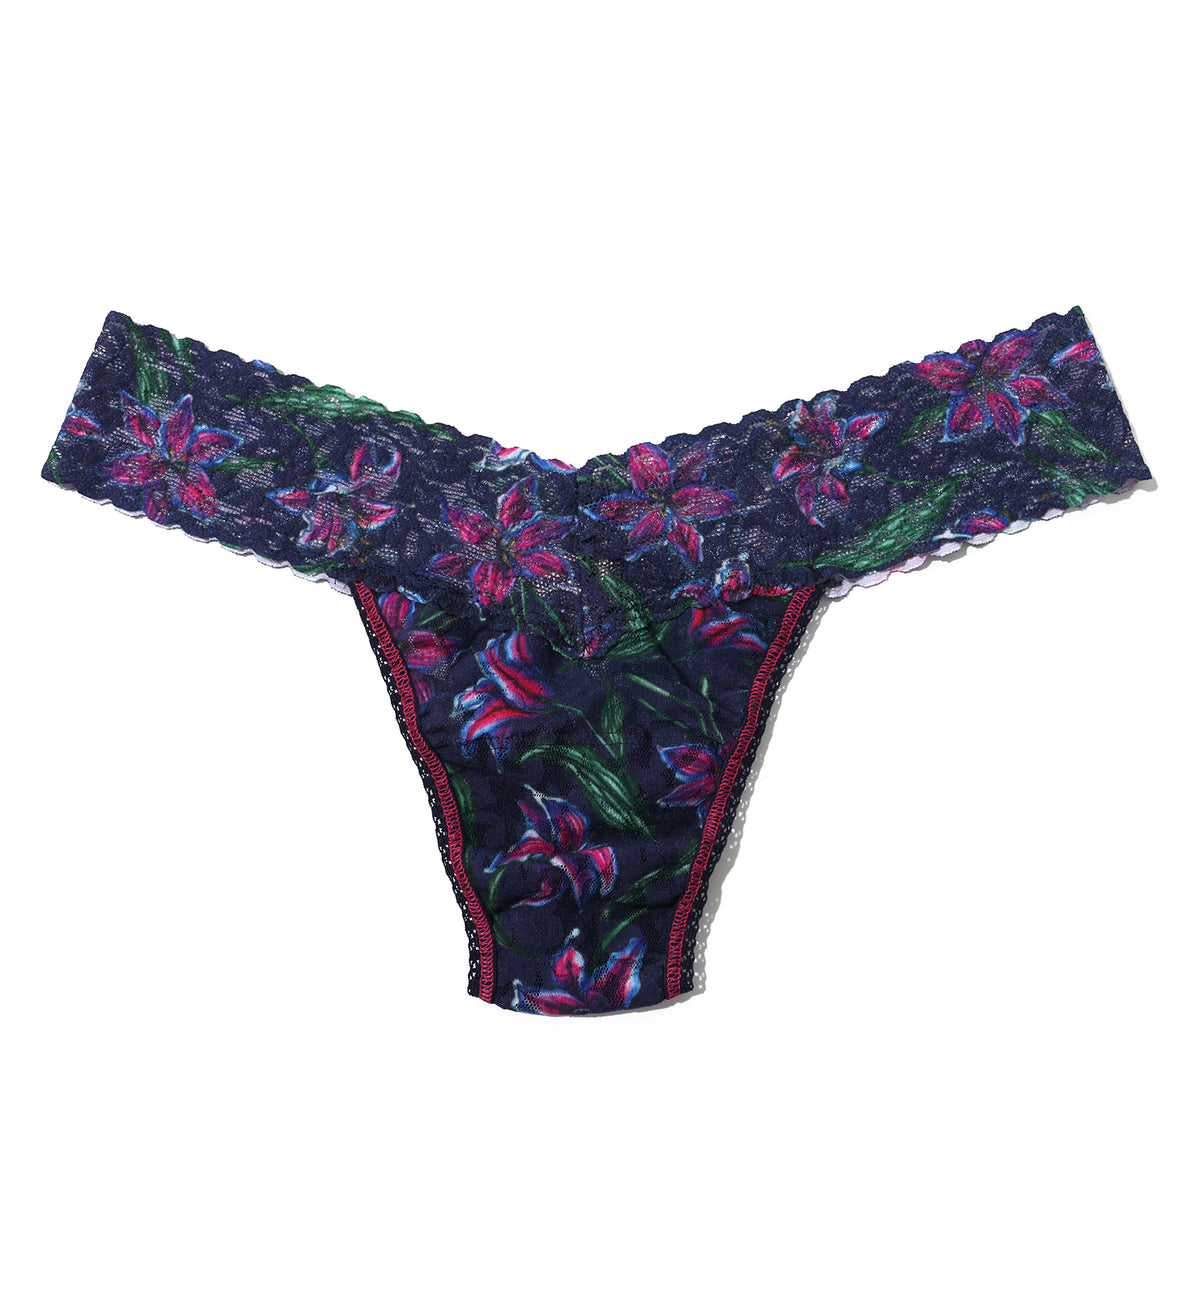 Hanky Panky Signature Lace Printed Low Rise Thong (PR4911P),Twilight Blooms - Twilight Blooms,One Size